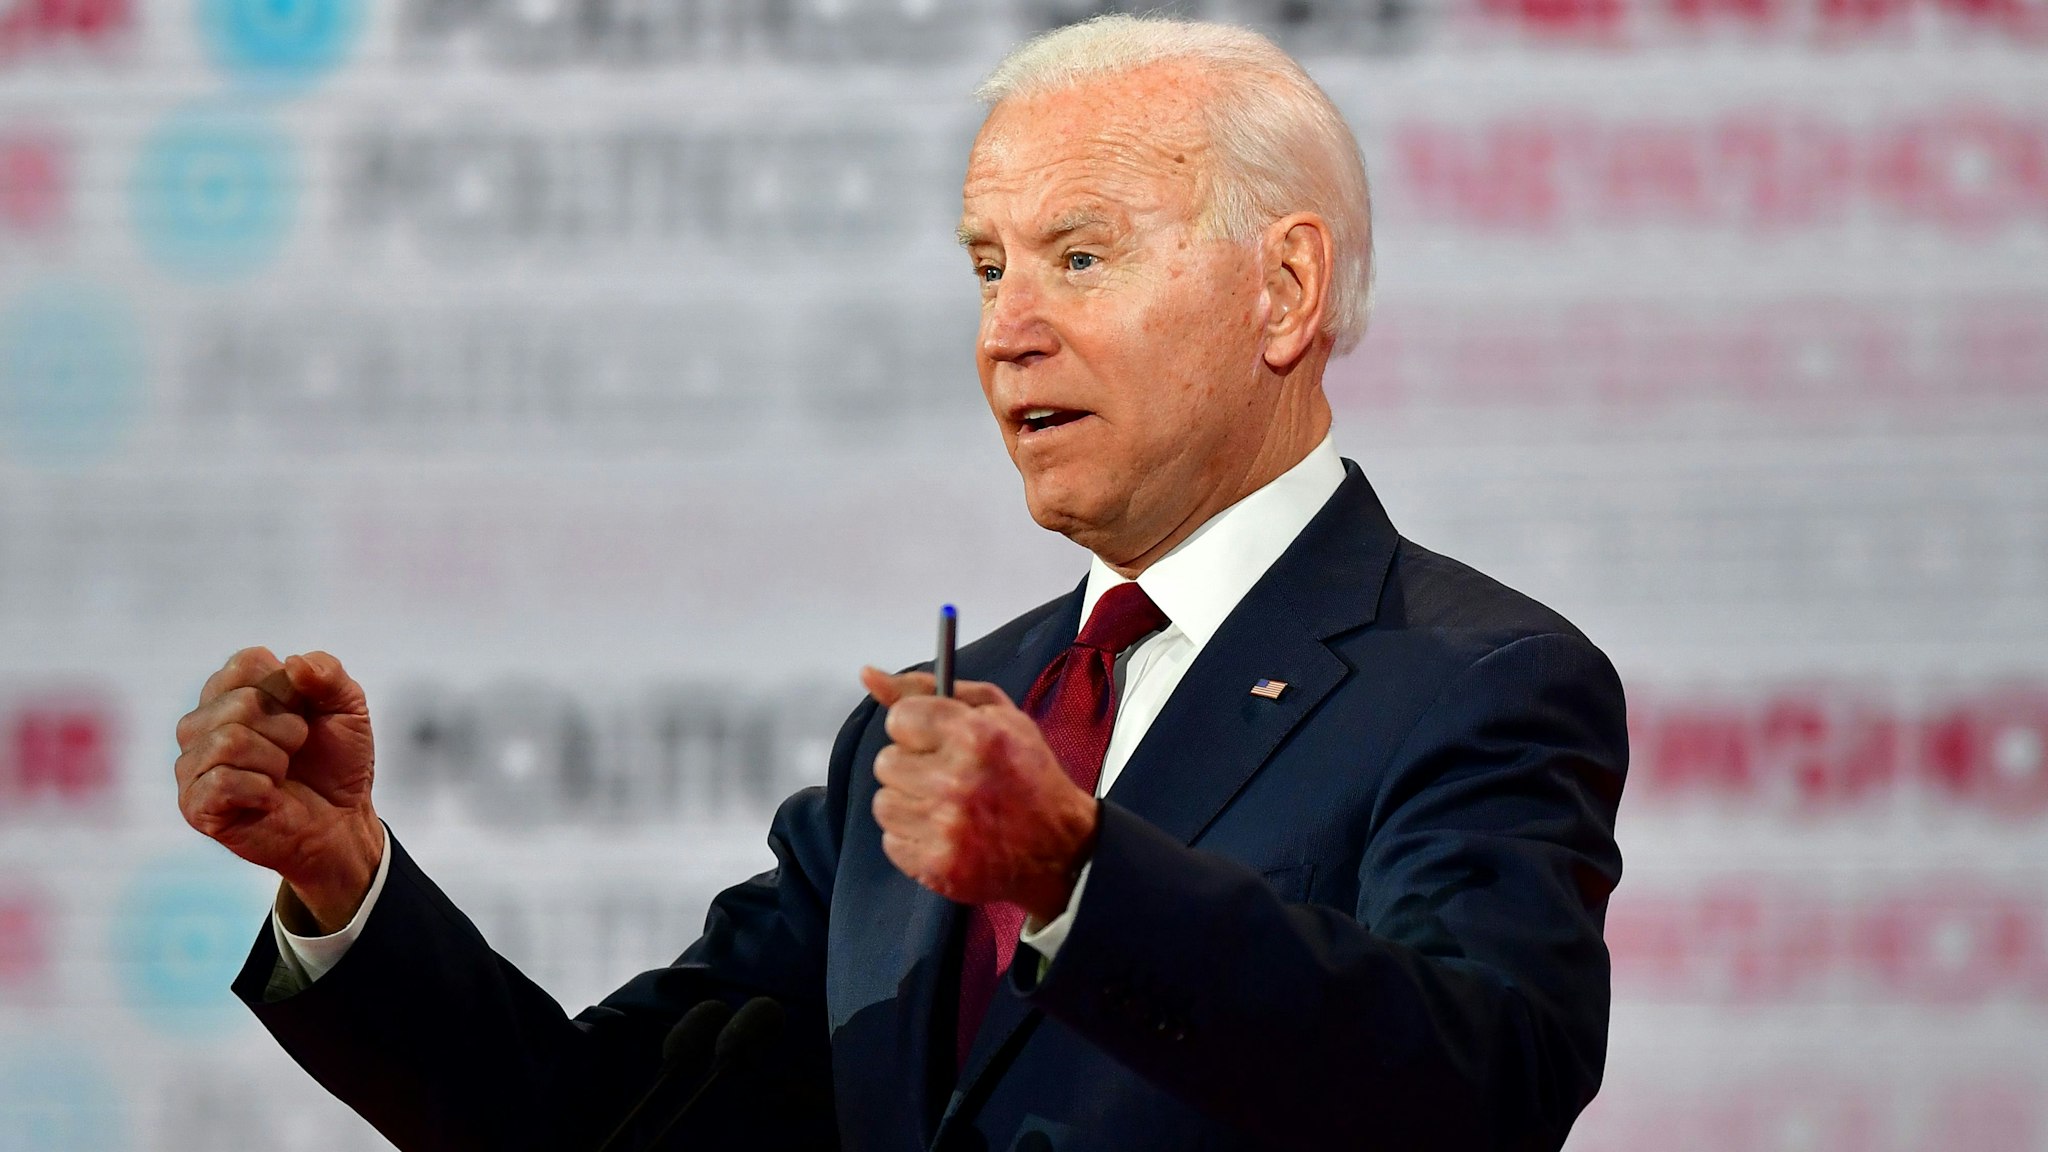 Democratic presidential hopeful former Vice President Joe Biden participates of the sixth Democratic primary debate of the 2020 presidential campaign season co-hosted by PBS NewsHour &amp; Politico at Loyola Marymount University in Los Angeles, California on December 19, 2019.